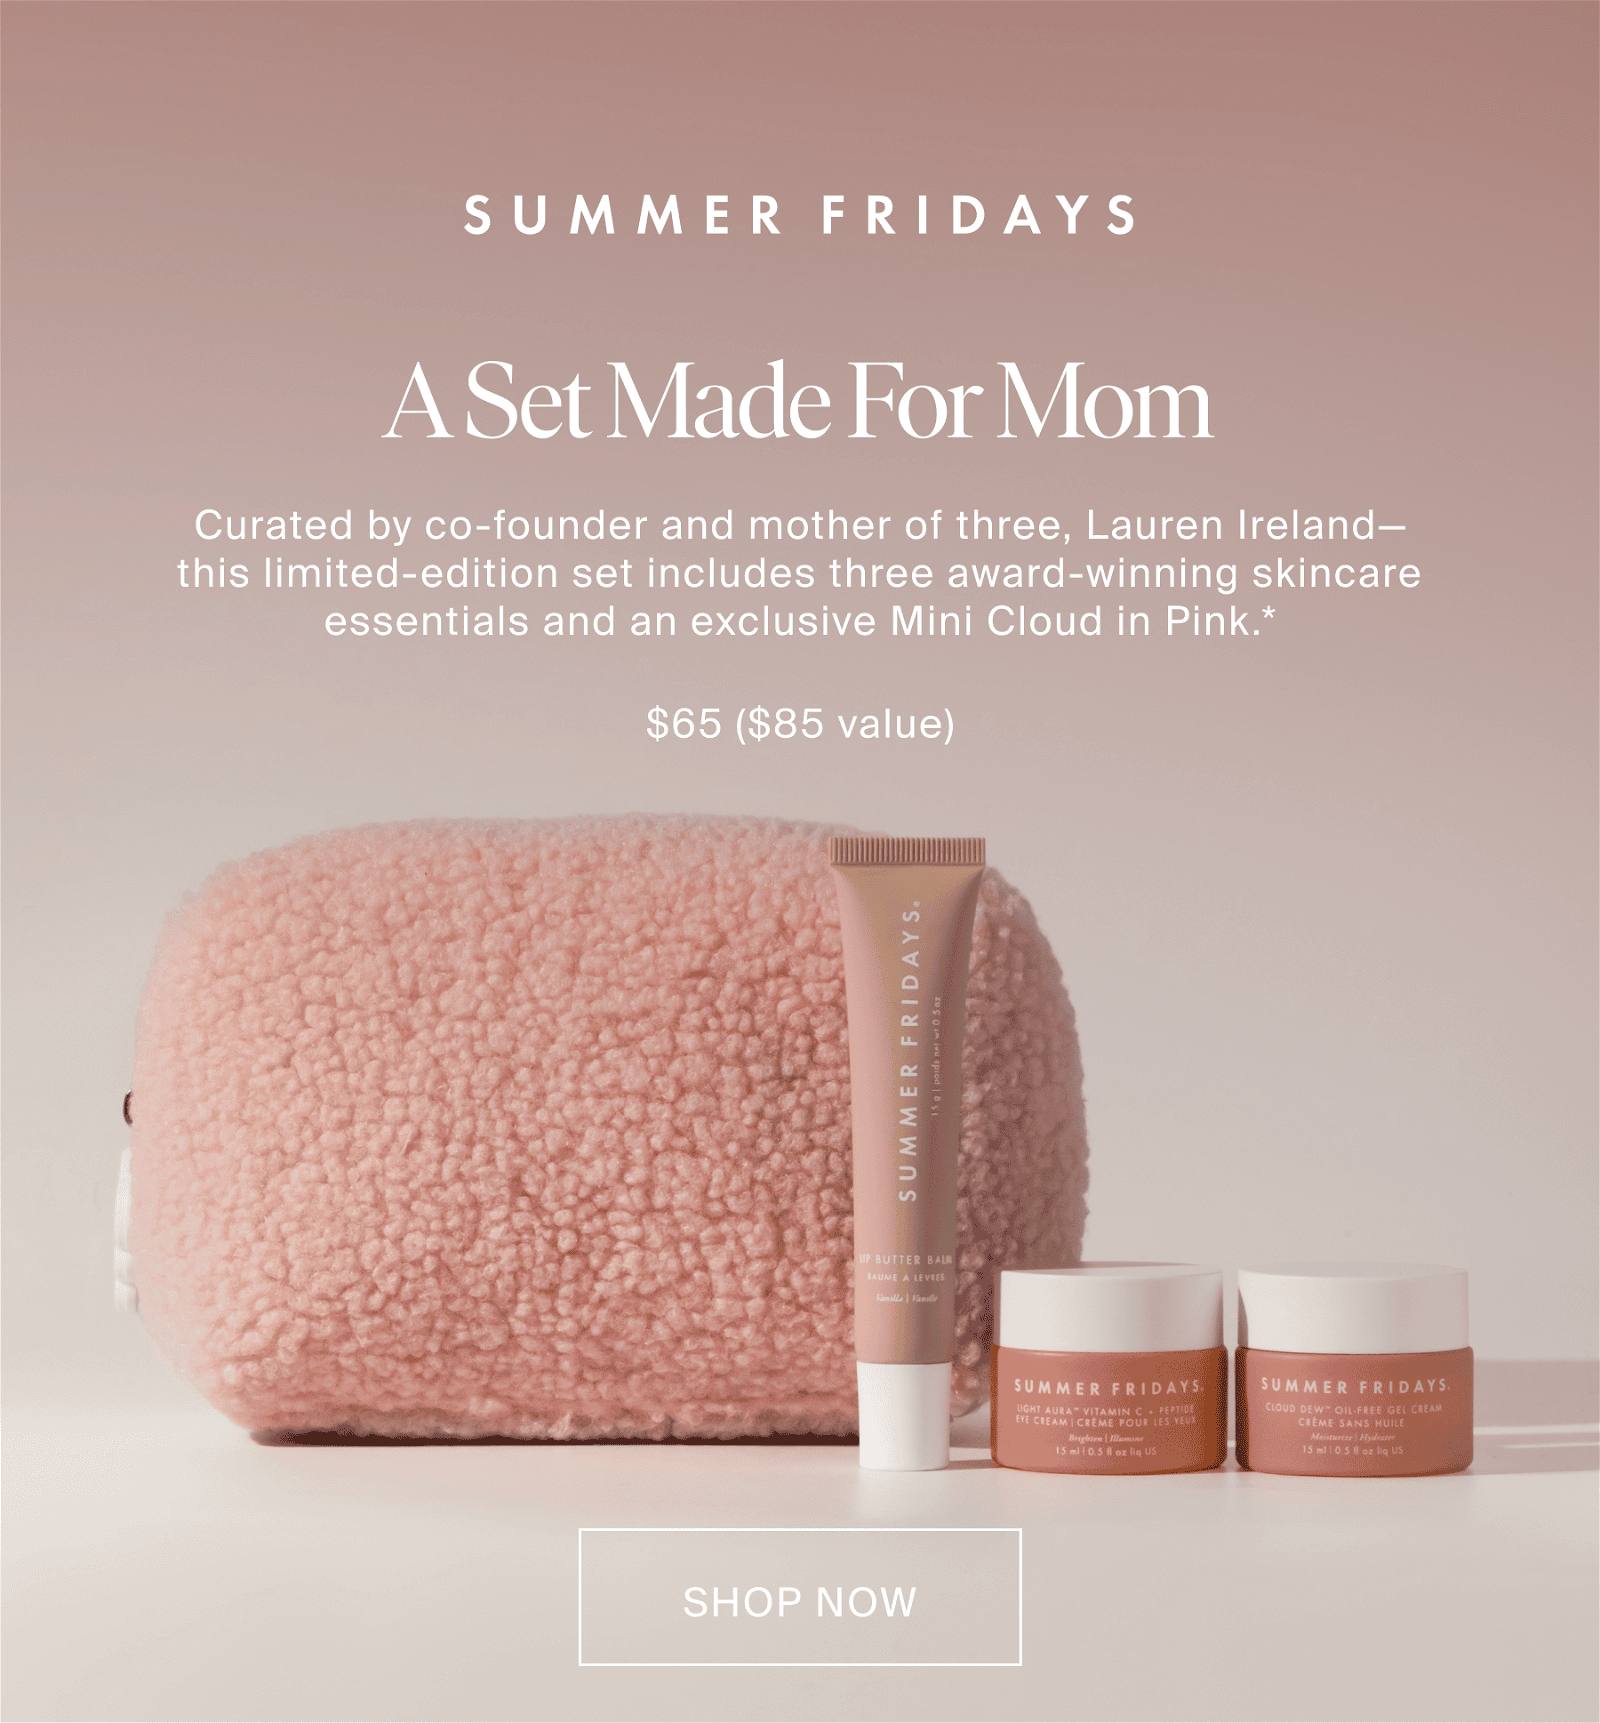 A Set Made for Mom - limited edition set includes three award-winning skincare essentials